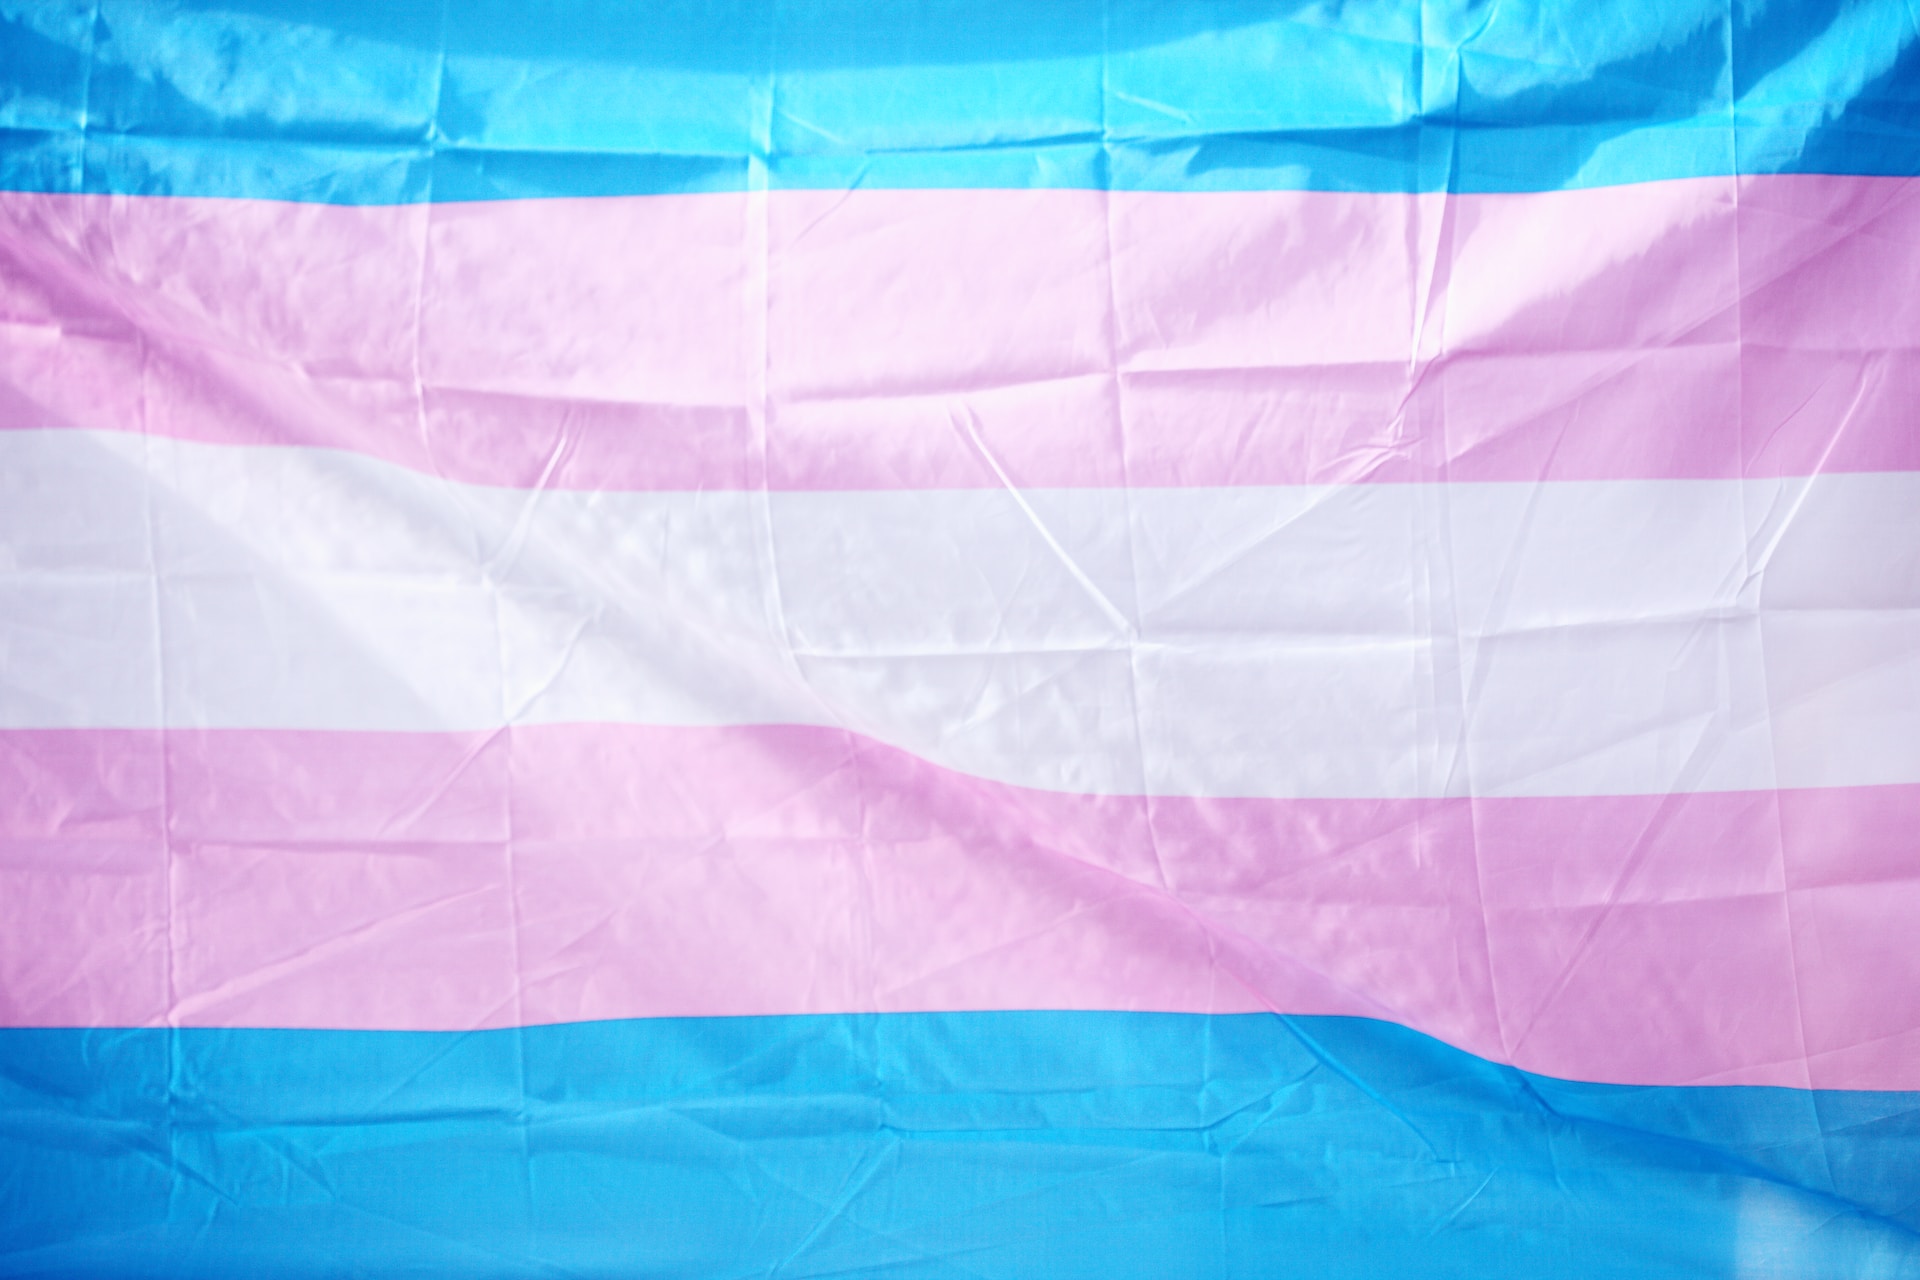 Transgender Day of Remembrance / Resilience